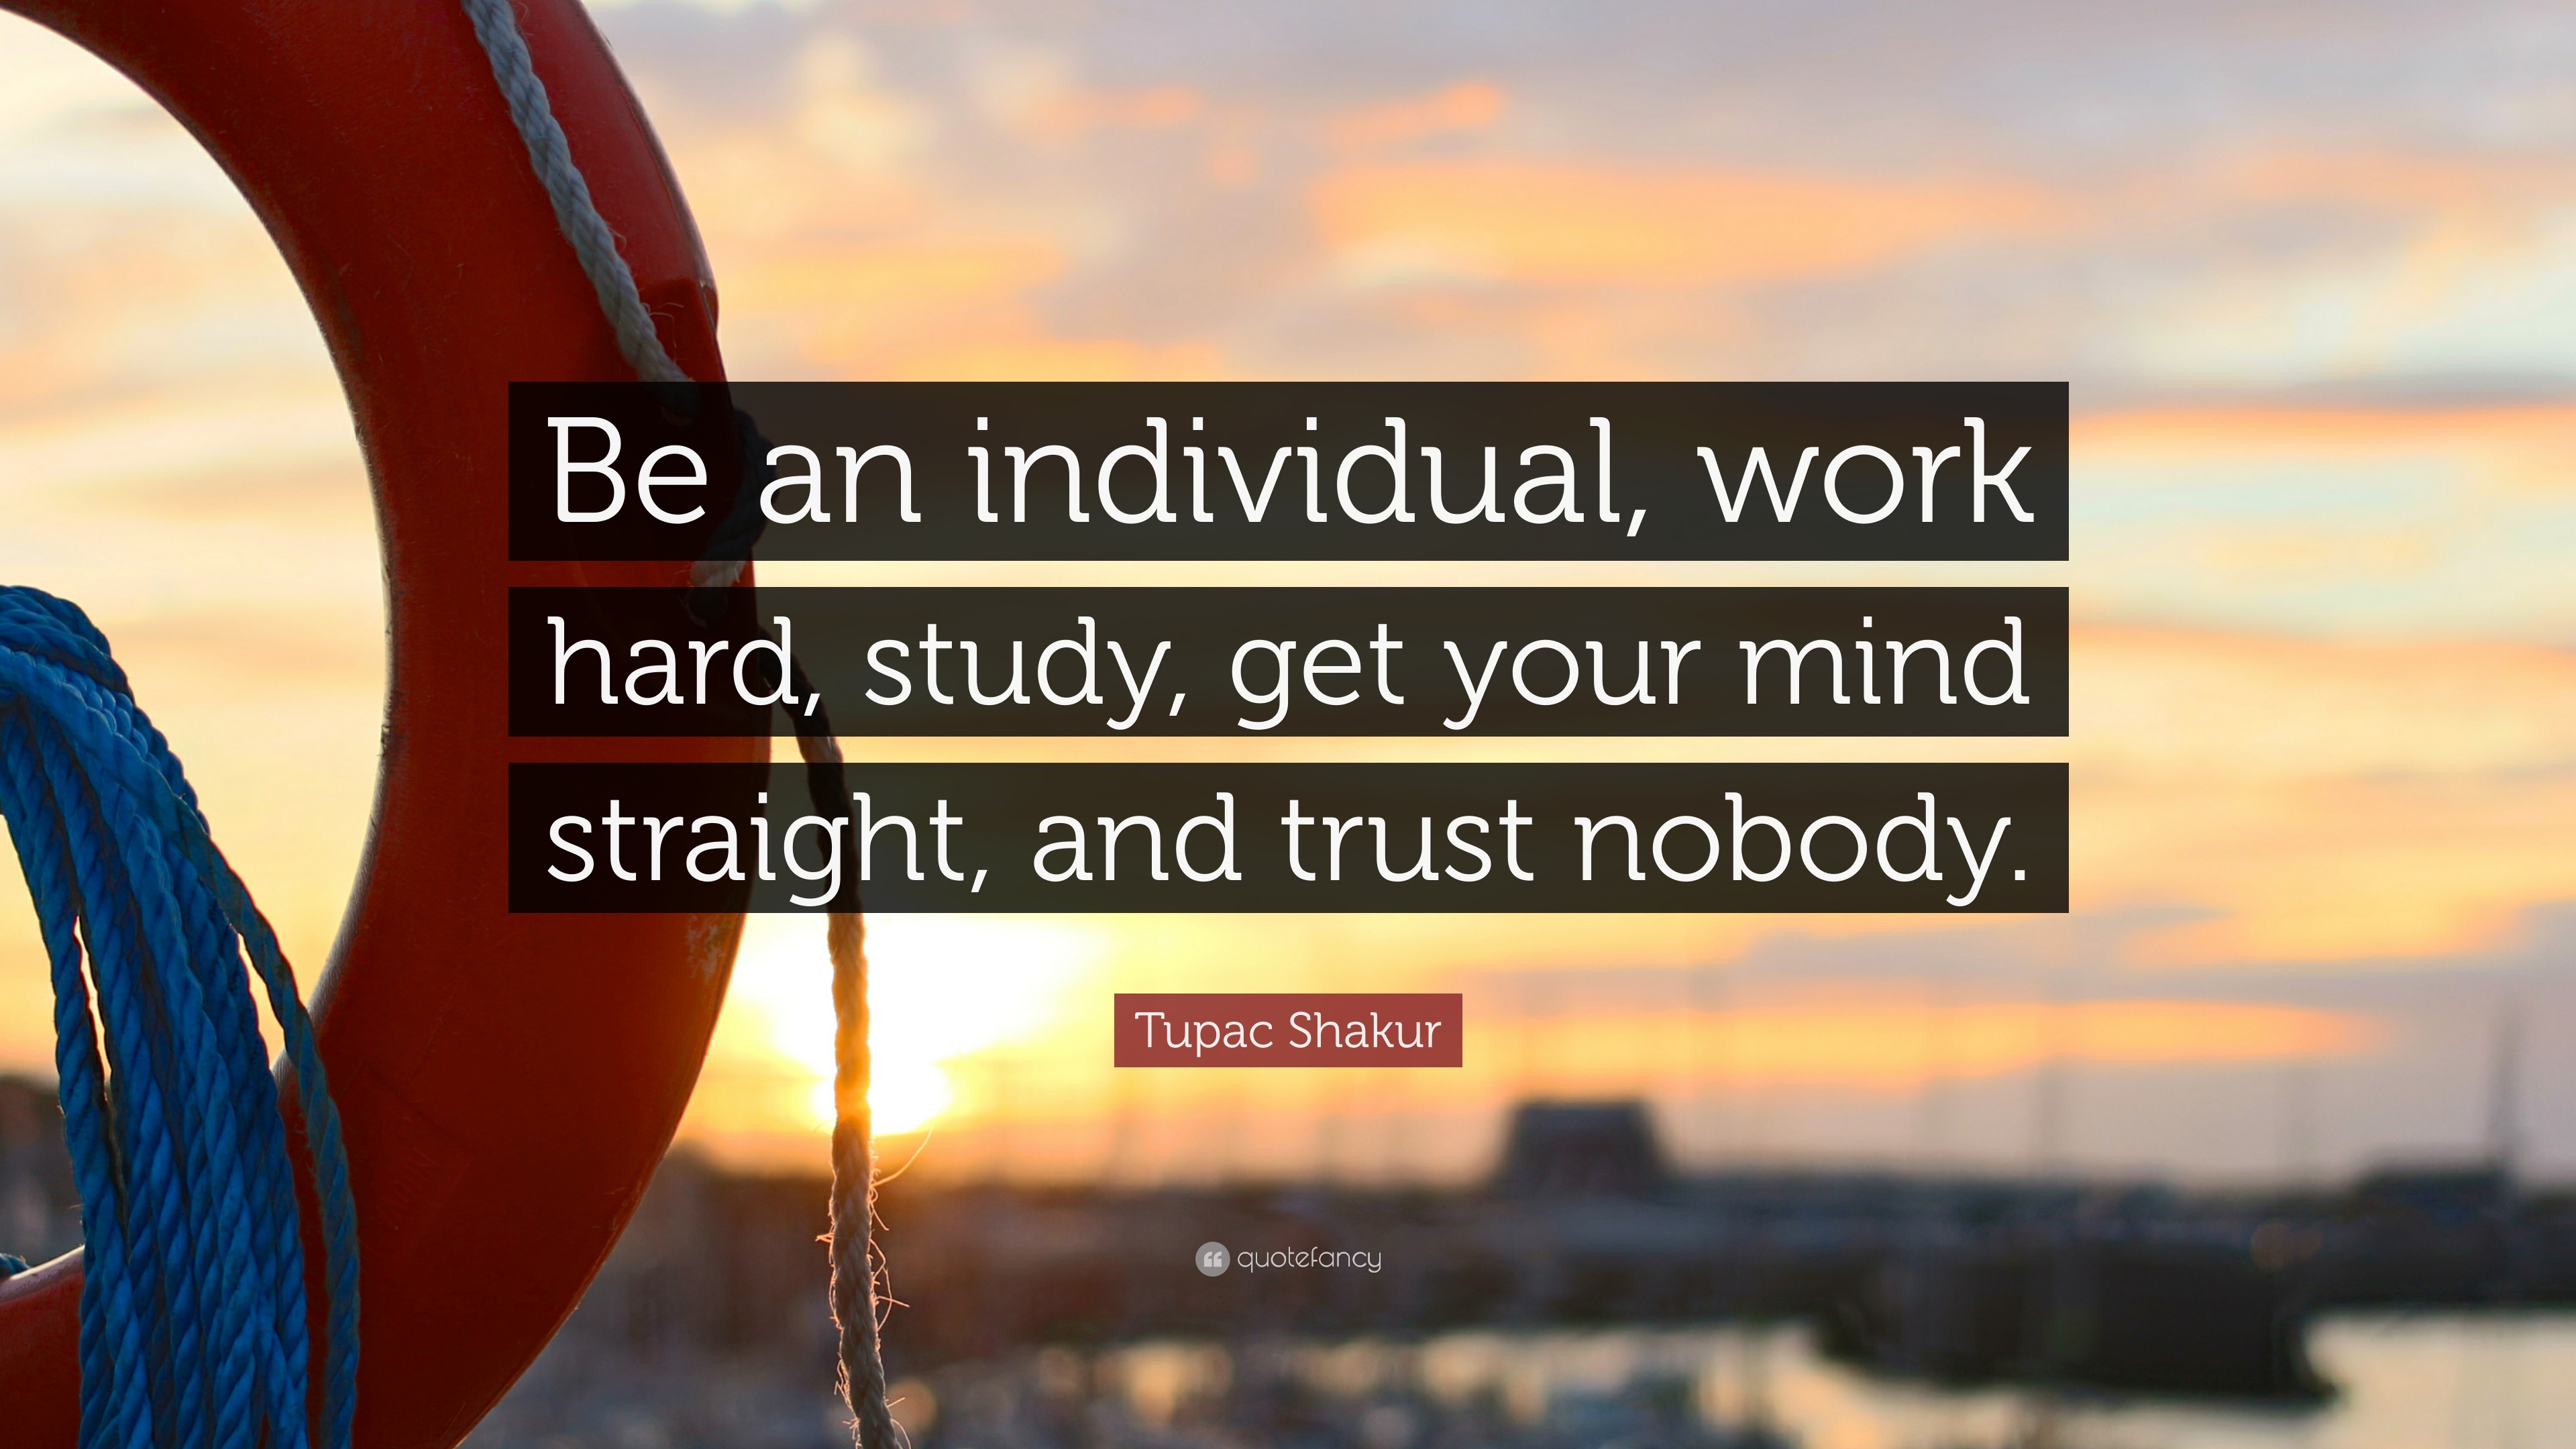 Tupac Shakur Quote: “Be an individual, work hard, study, get your mind